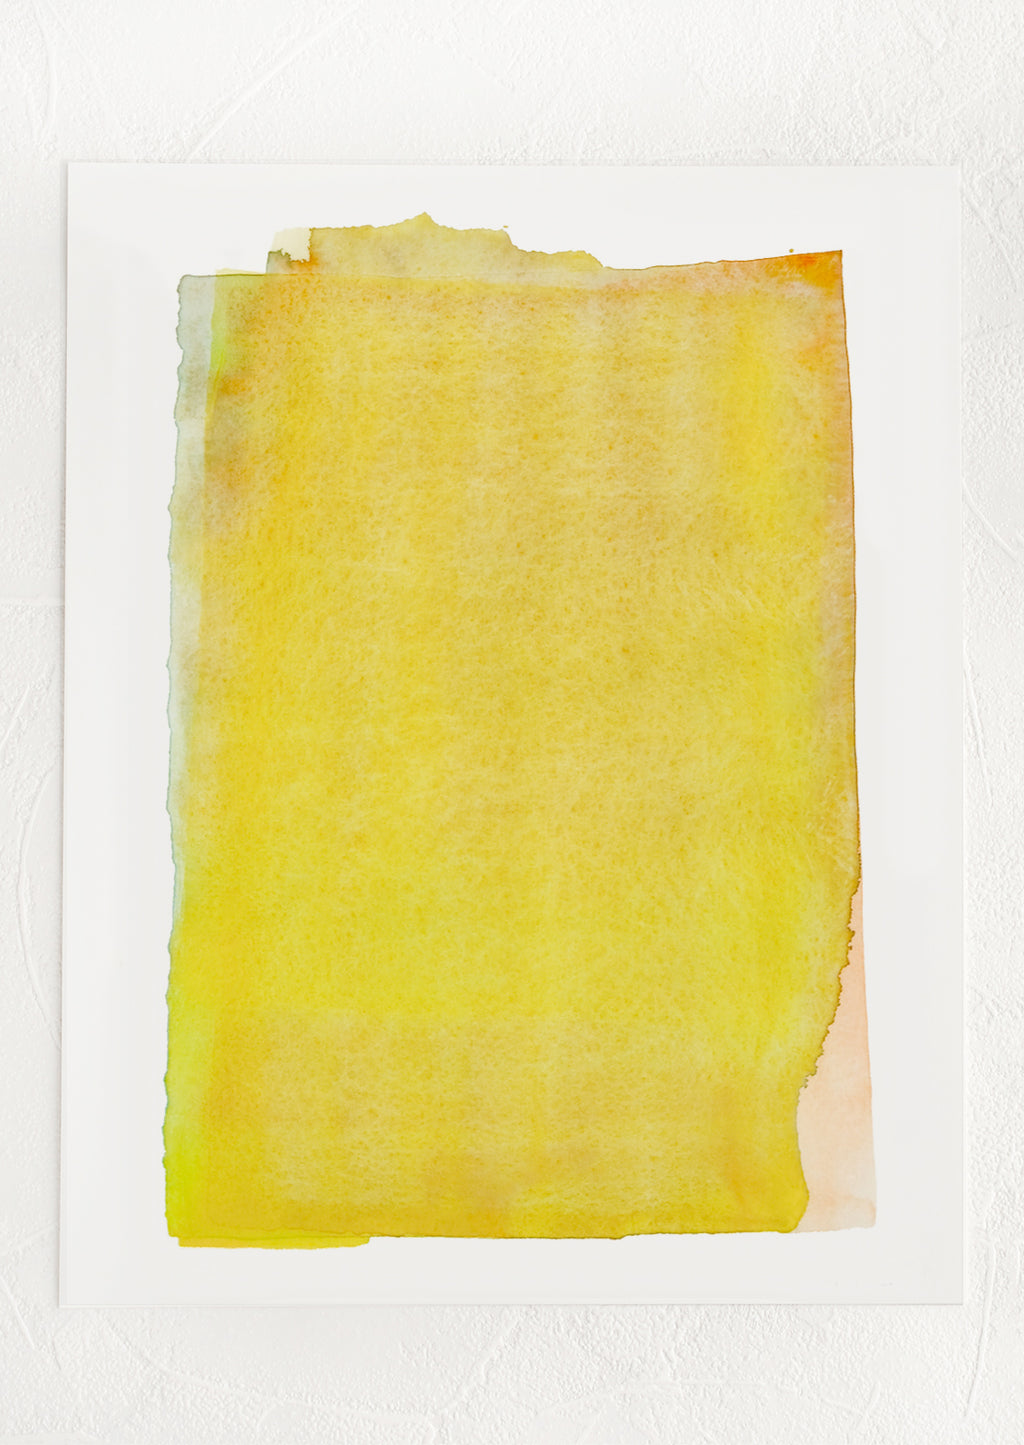 1: An art print with layered watercolor form in yellow, green and peach.